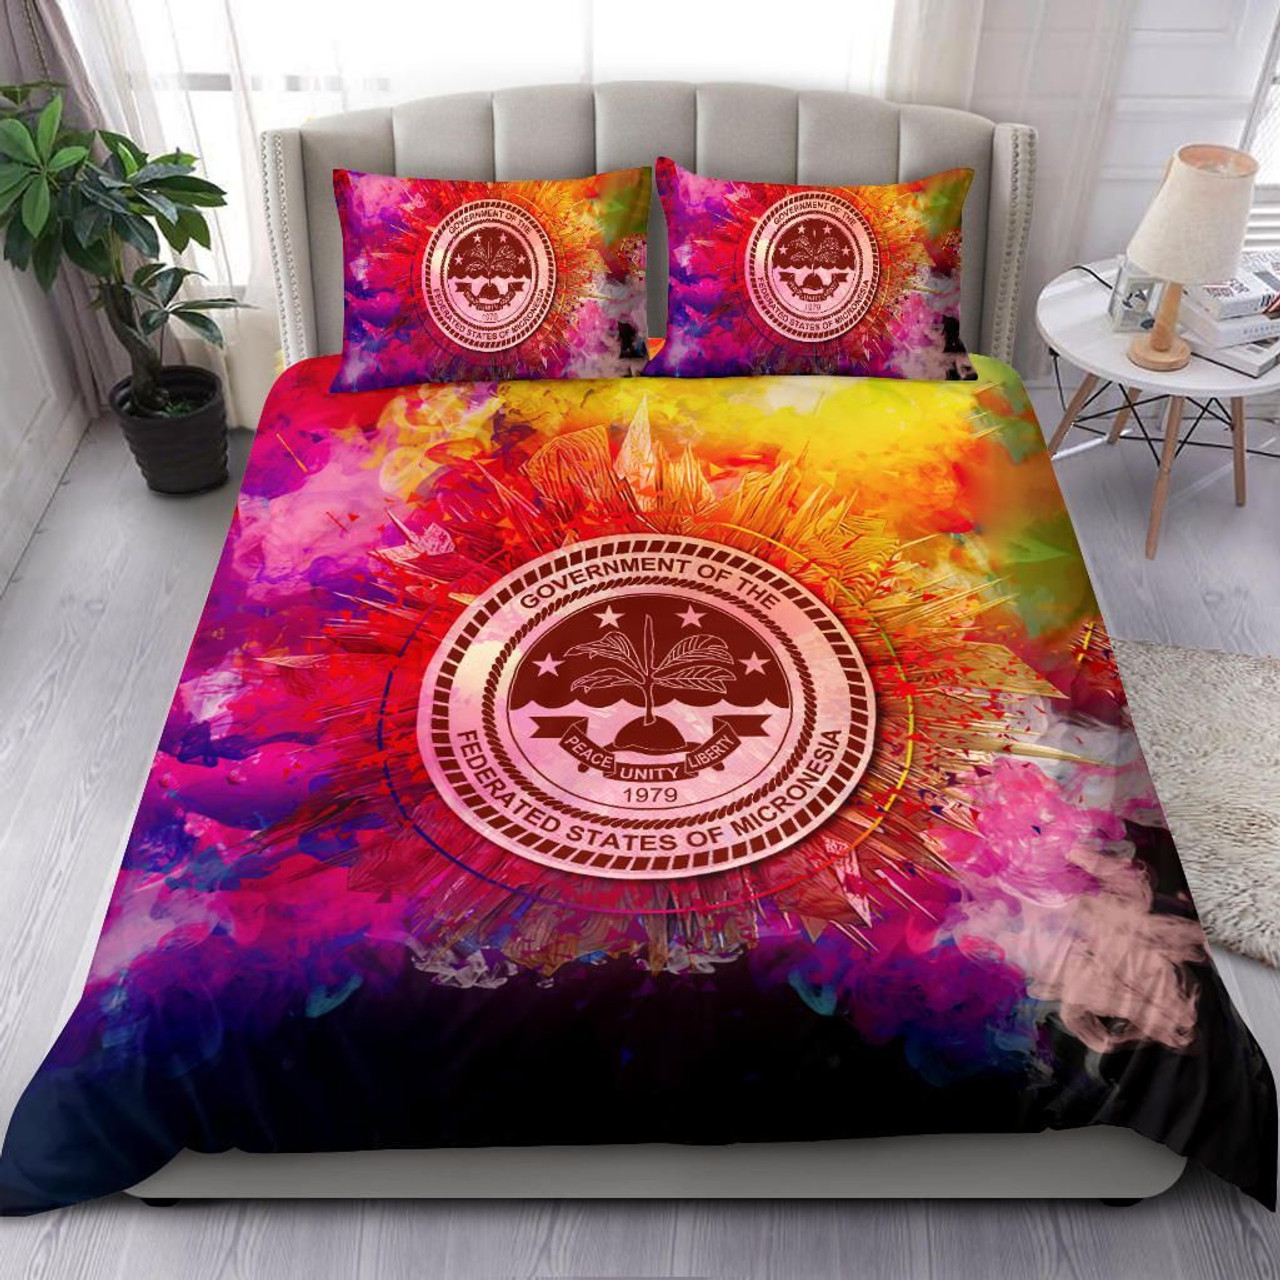 Polynesian Bedding Set - Federated States Of Micronesia Duvet Cover Set Father And Son Red 5